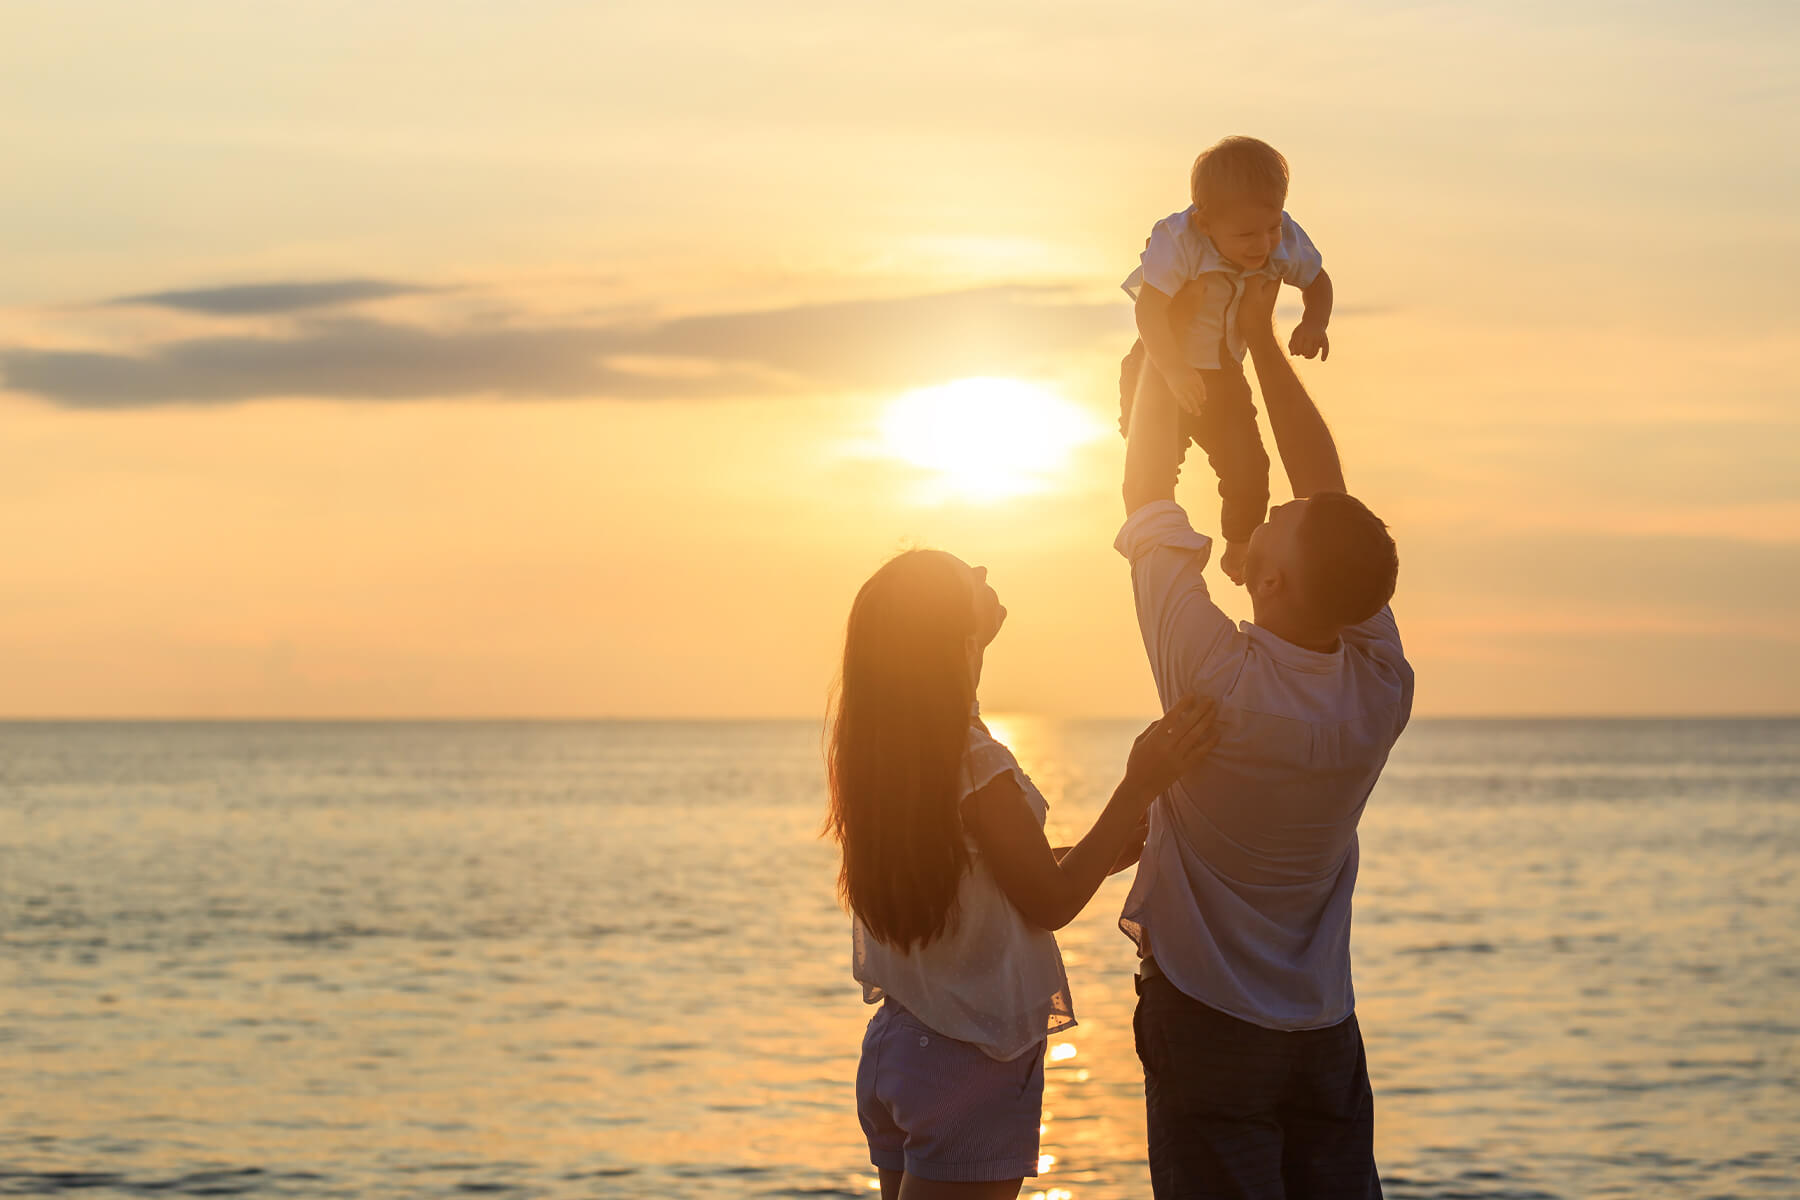 Estate Law hero image showing a family at sunset